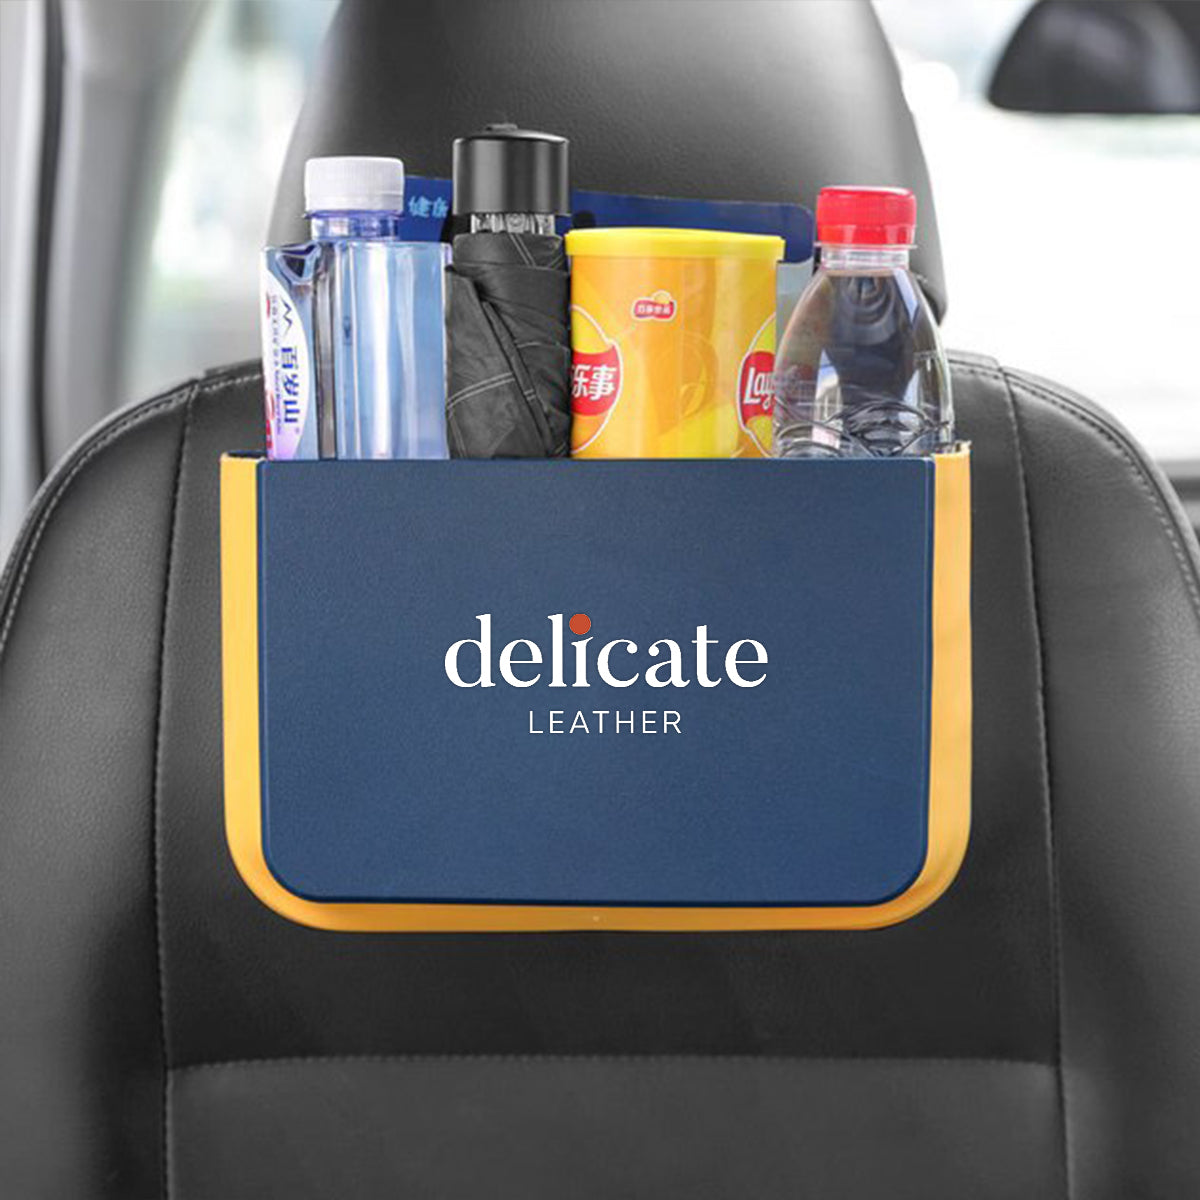 Hanging Waterproof Car Trash can-Foldable, Custom For Your Cars, Waterproof, and Equipped with Cup Holders and Trays. Multi-Purpose, Car Accessories MY11992 - Delicate Leather